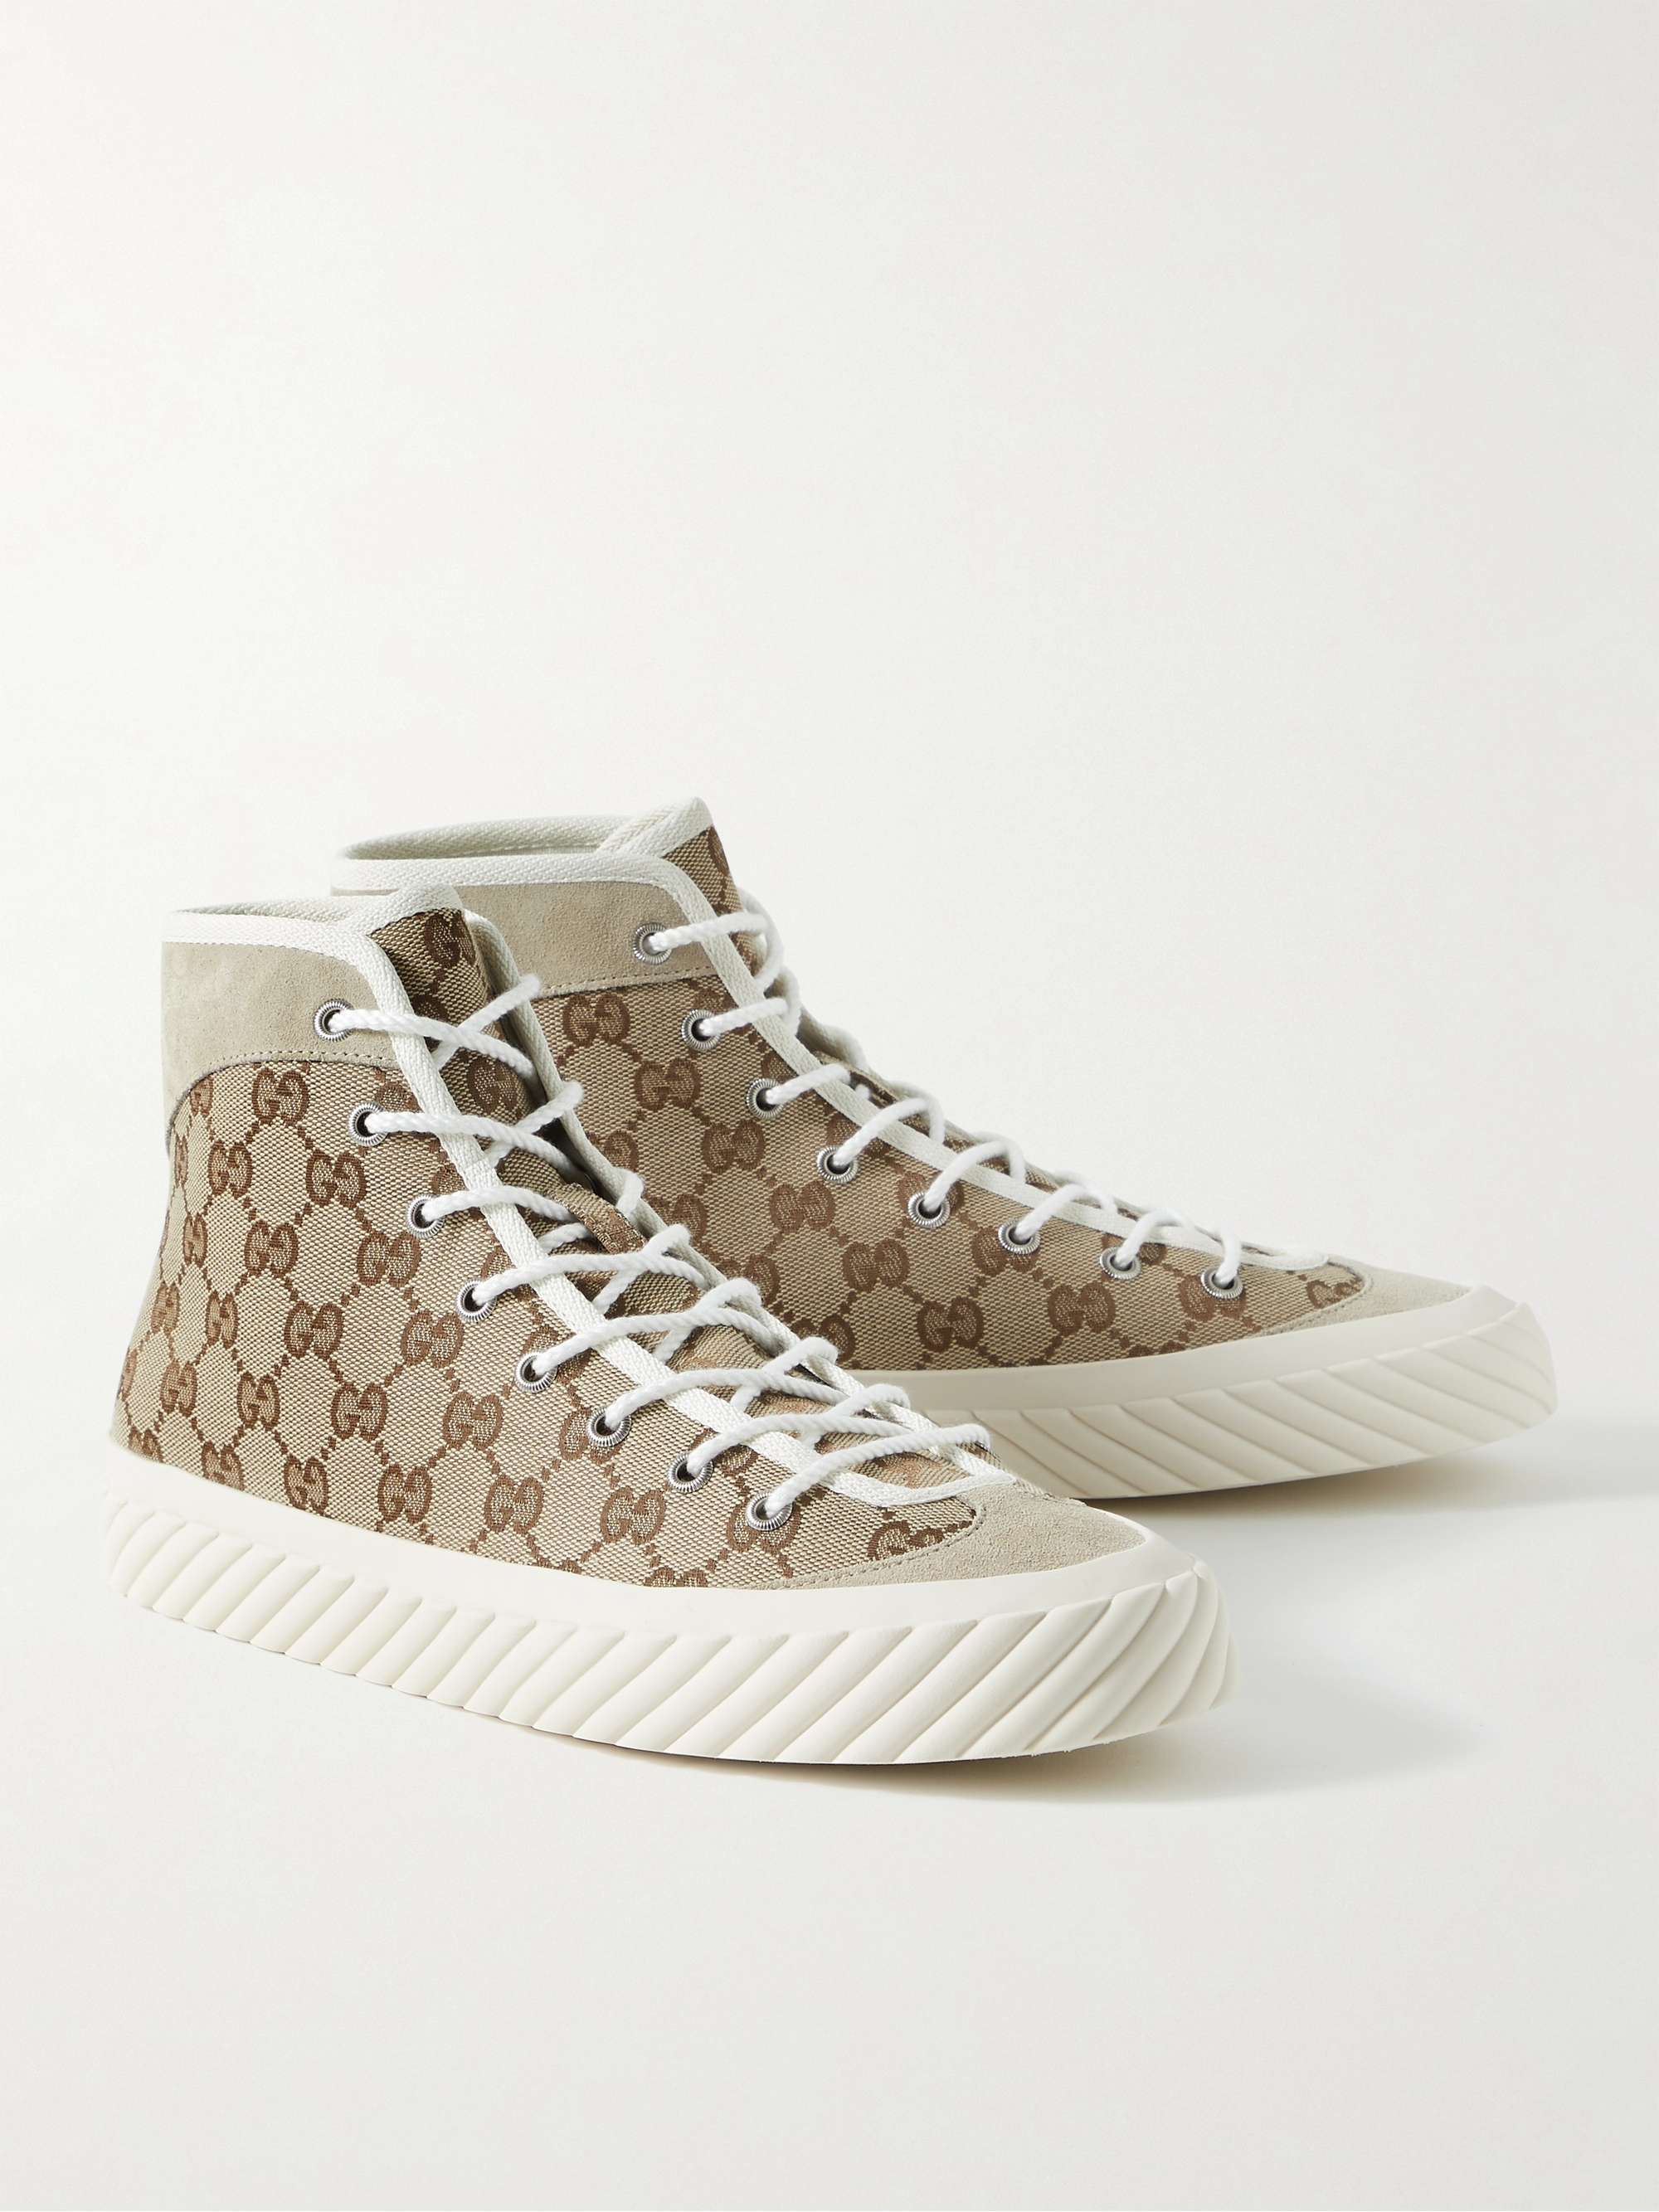 GUCCI Suede-Trimmed Monogrammed Canvas High-Top Sneakers